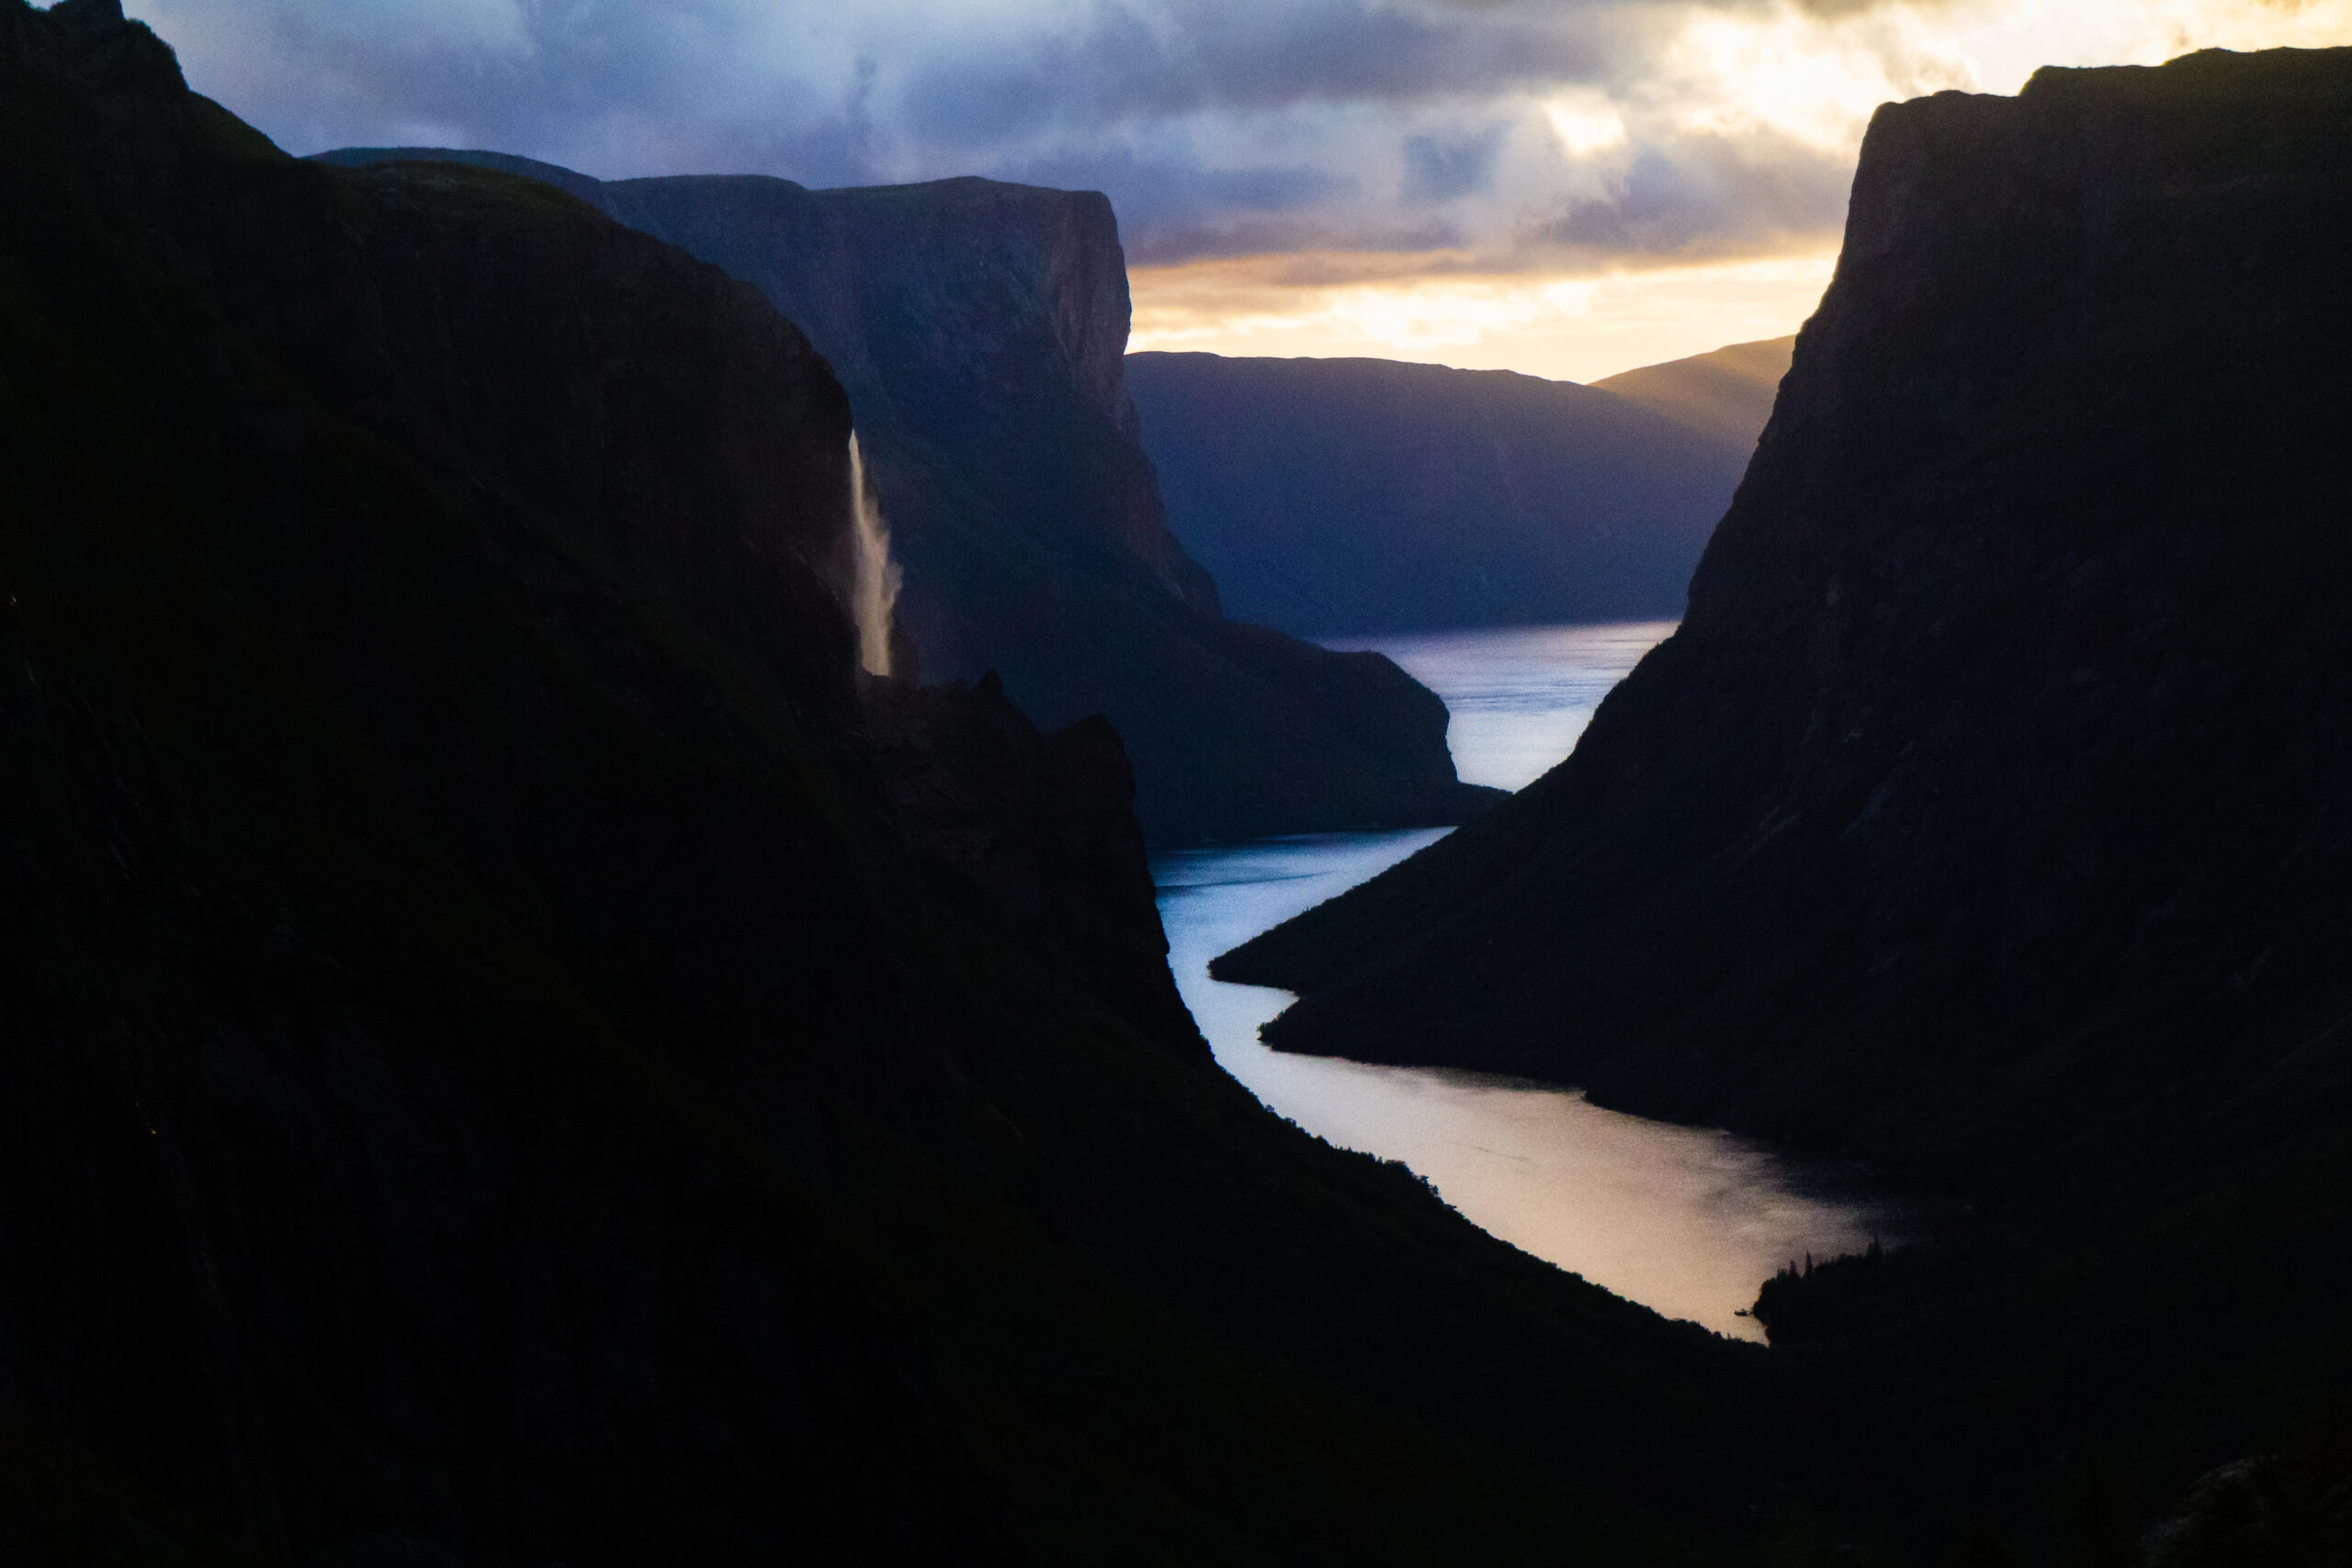 Sunset fjord photo from Newfoundland nature stock photography website